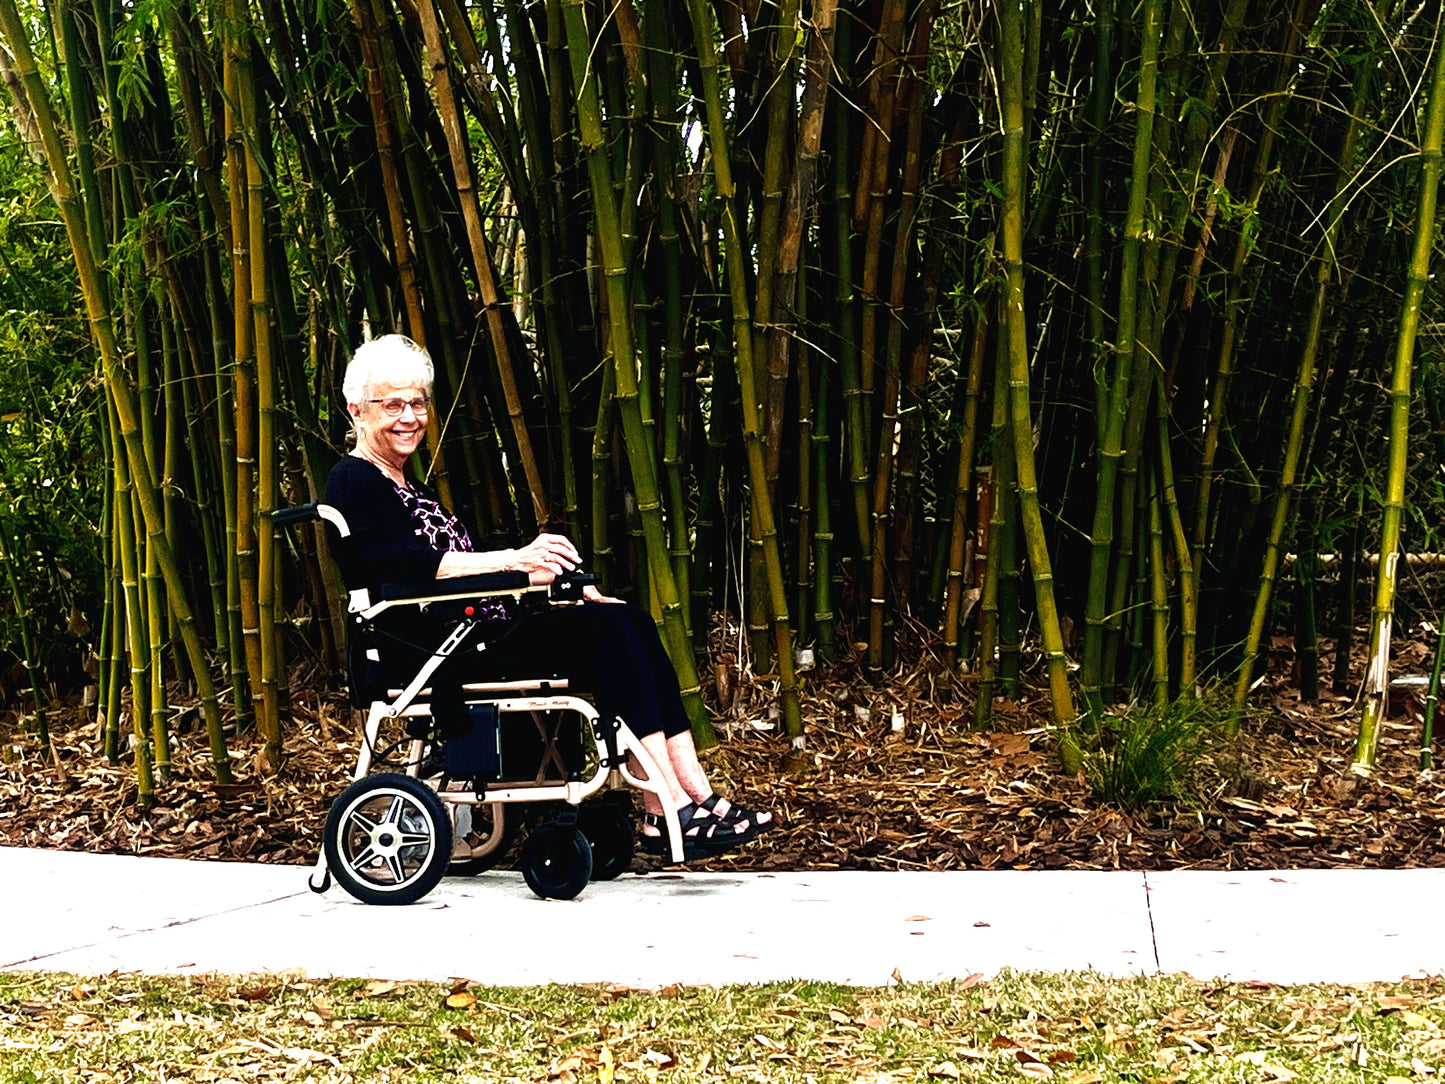 Miracle Mobility Falcon 5000 Electric Wheelchair